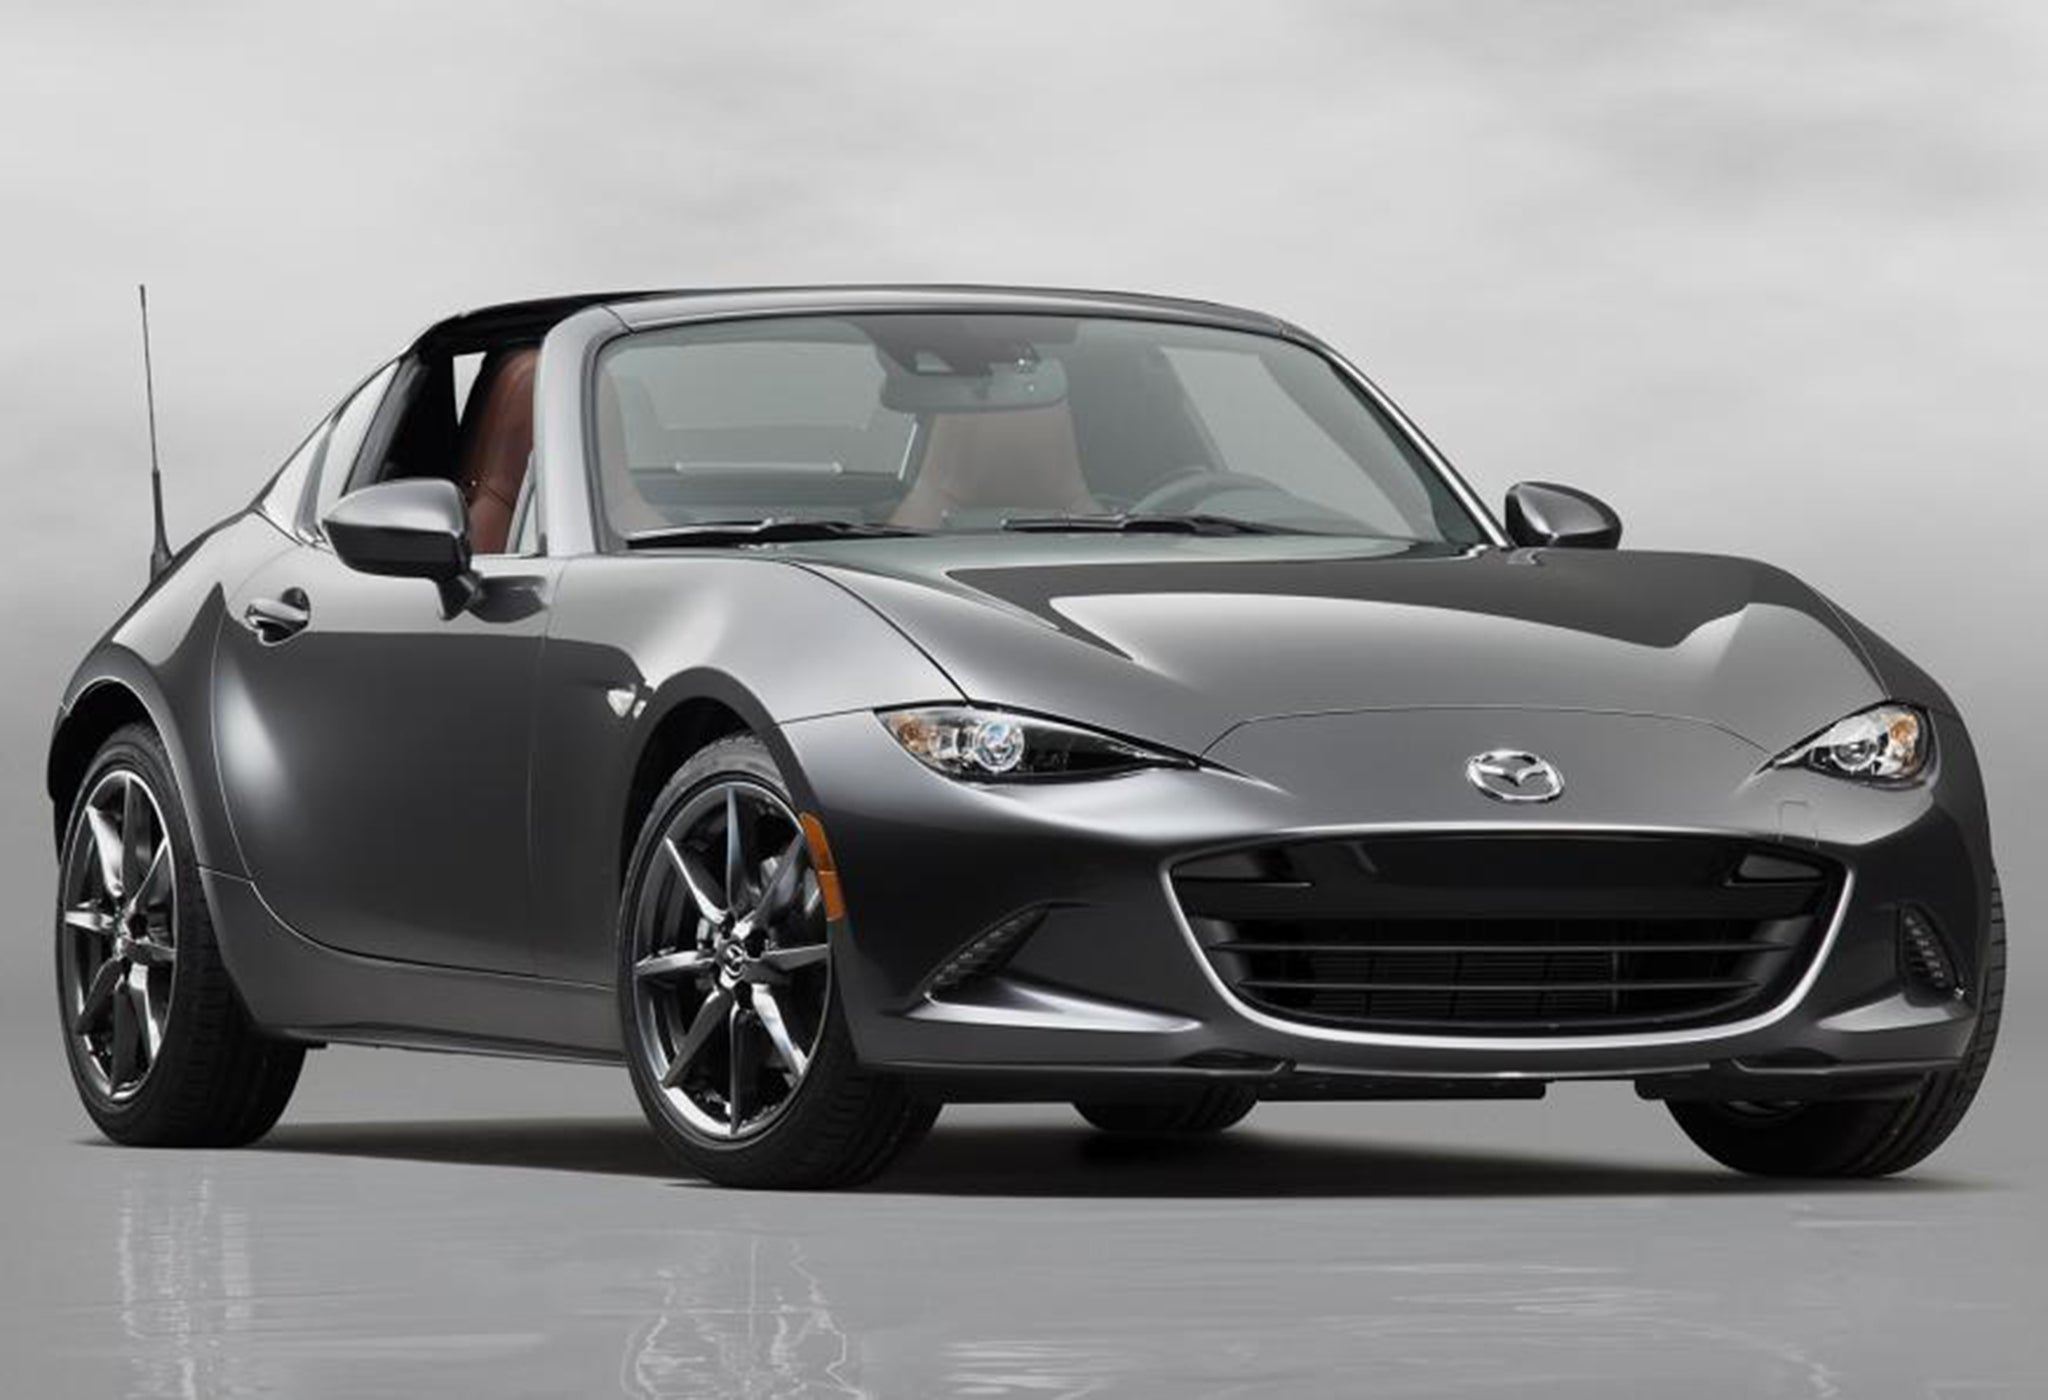 Mazda have tried to combine a hard-top with a soft-top for the new RF version